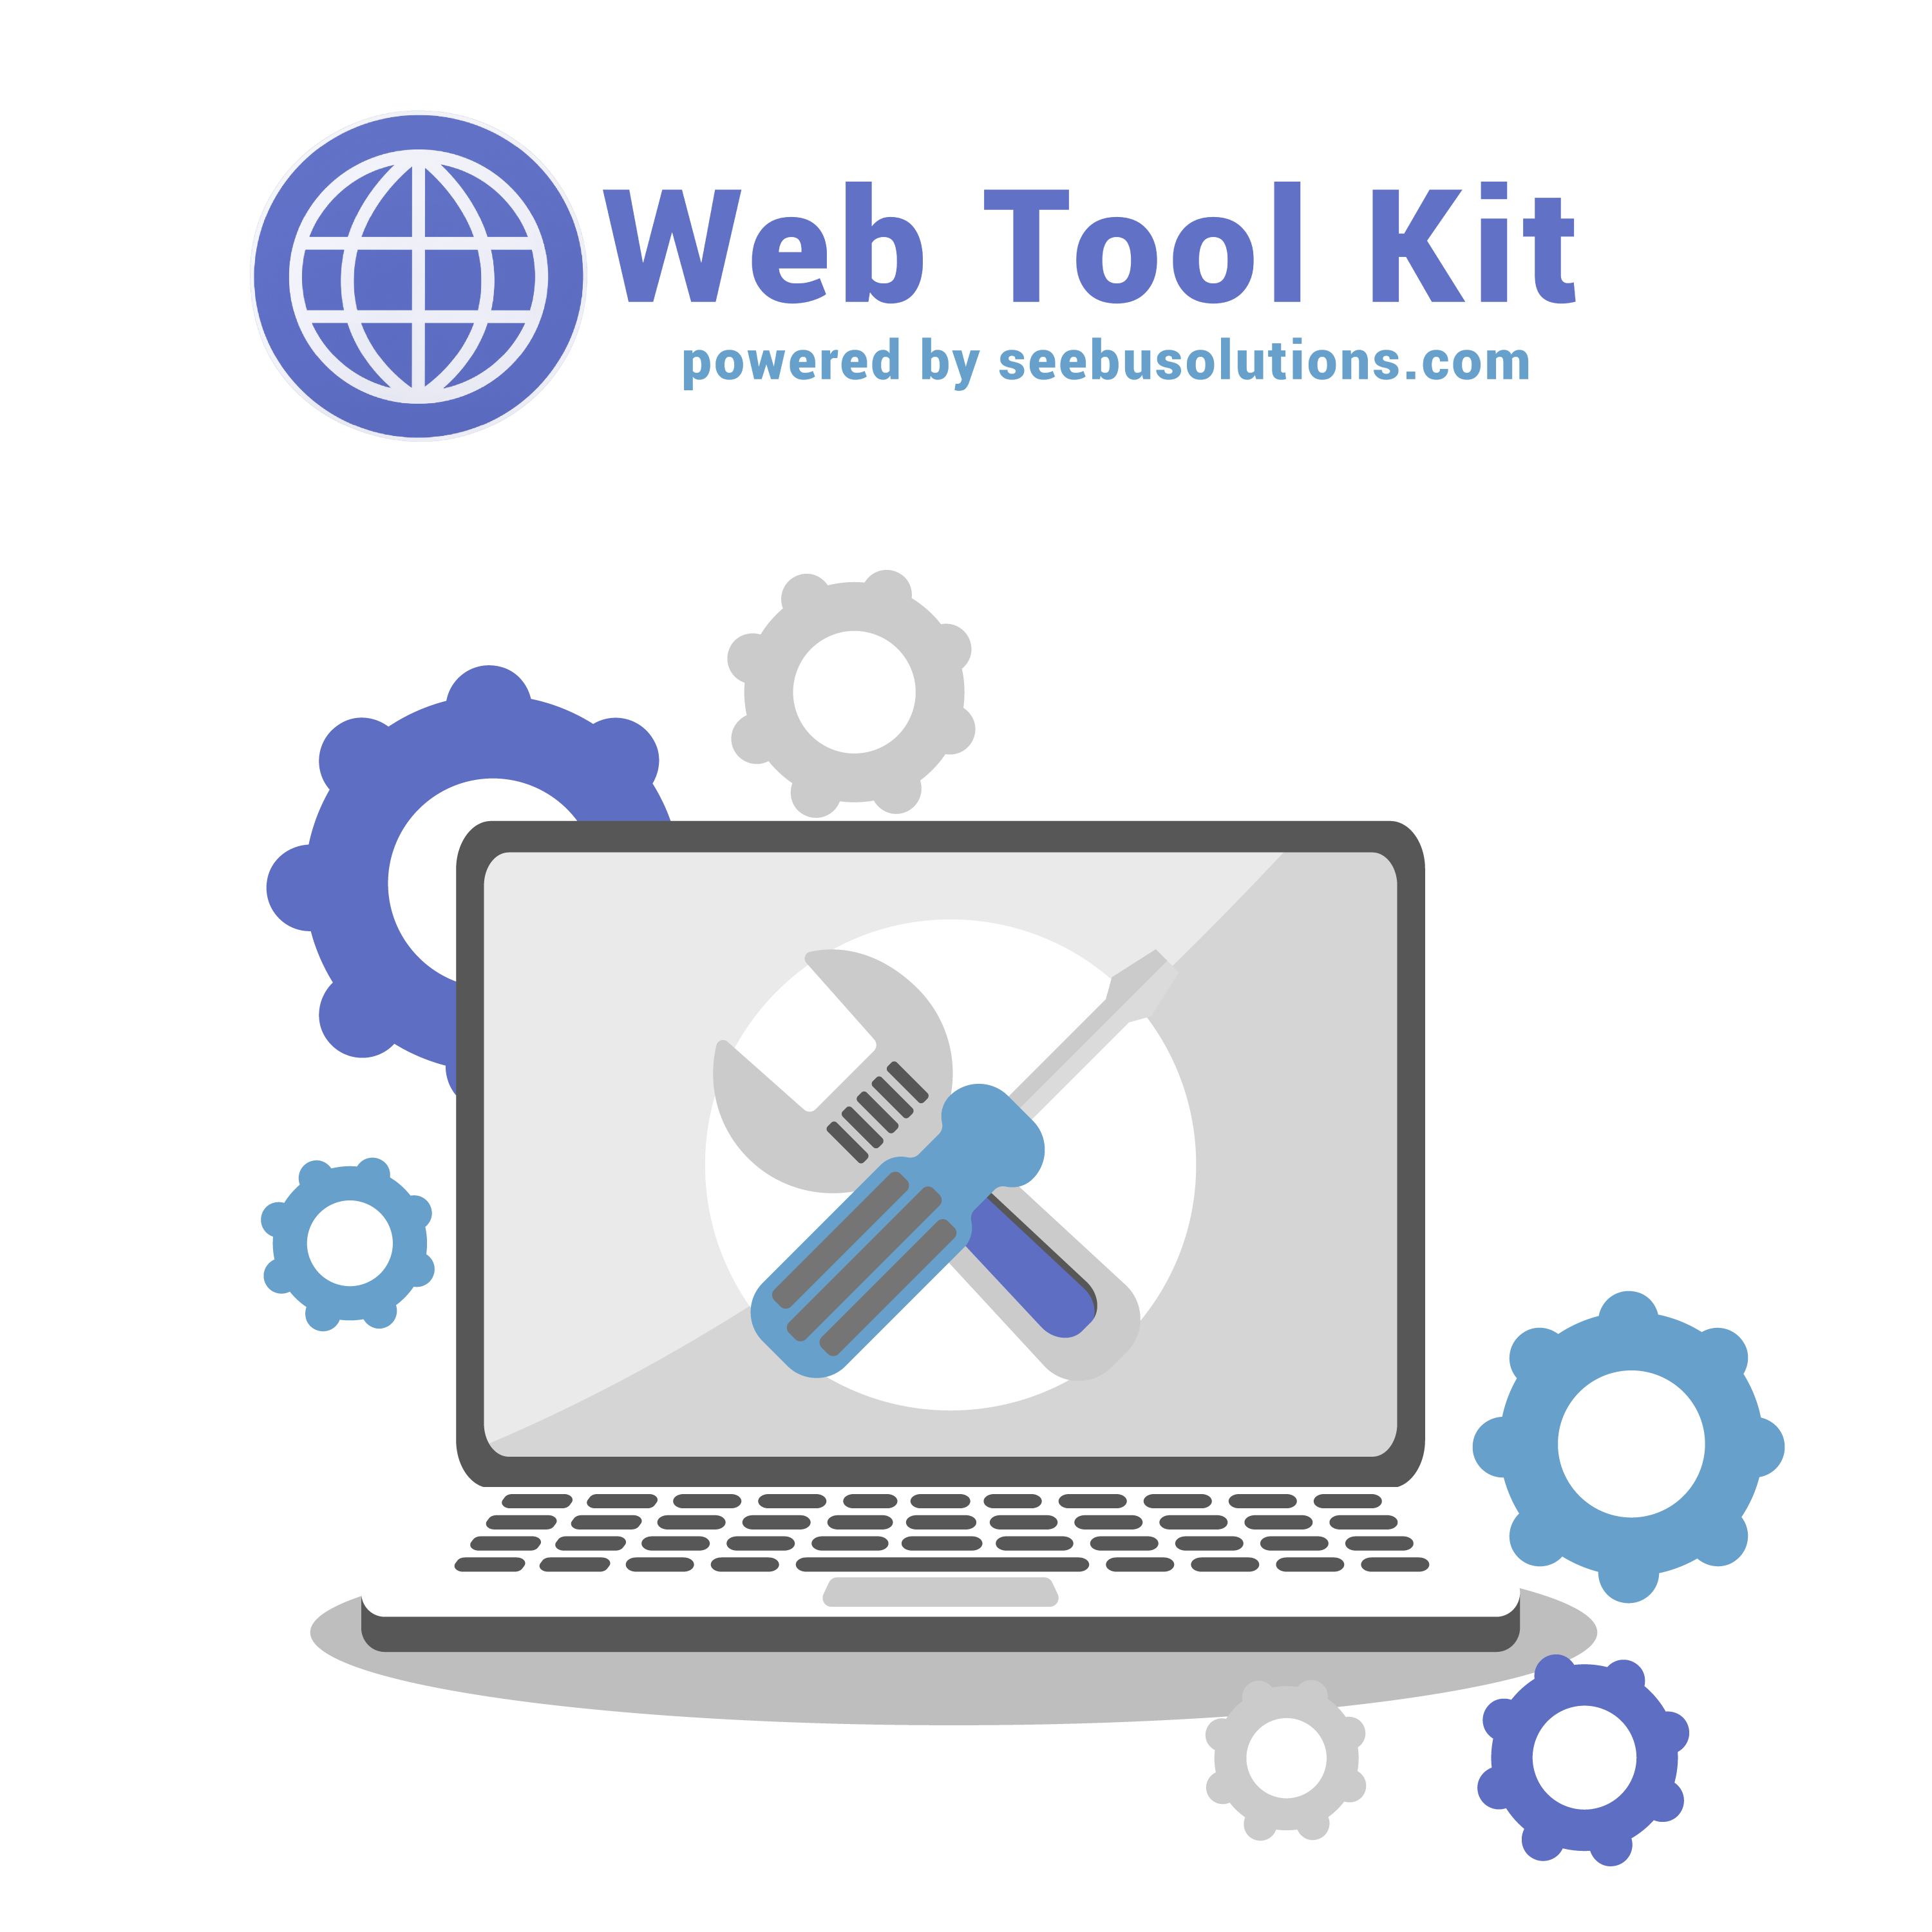 webtoolkit-Our-Products-feature